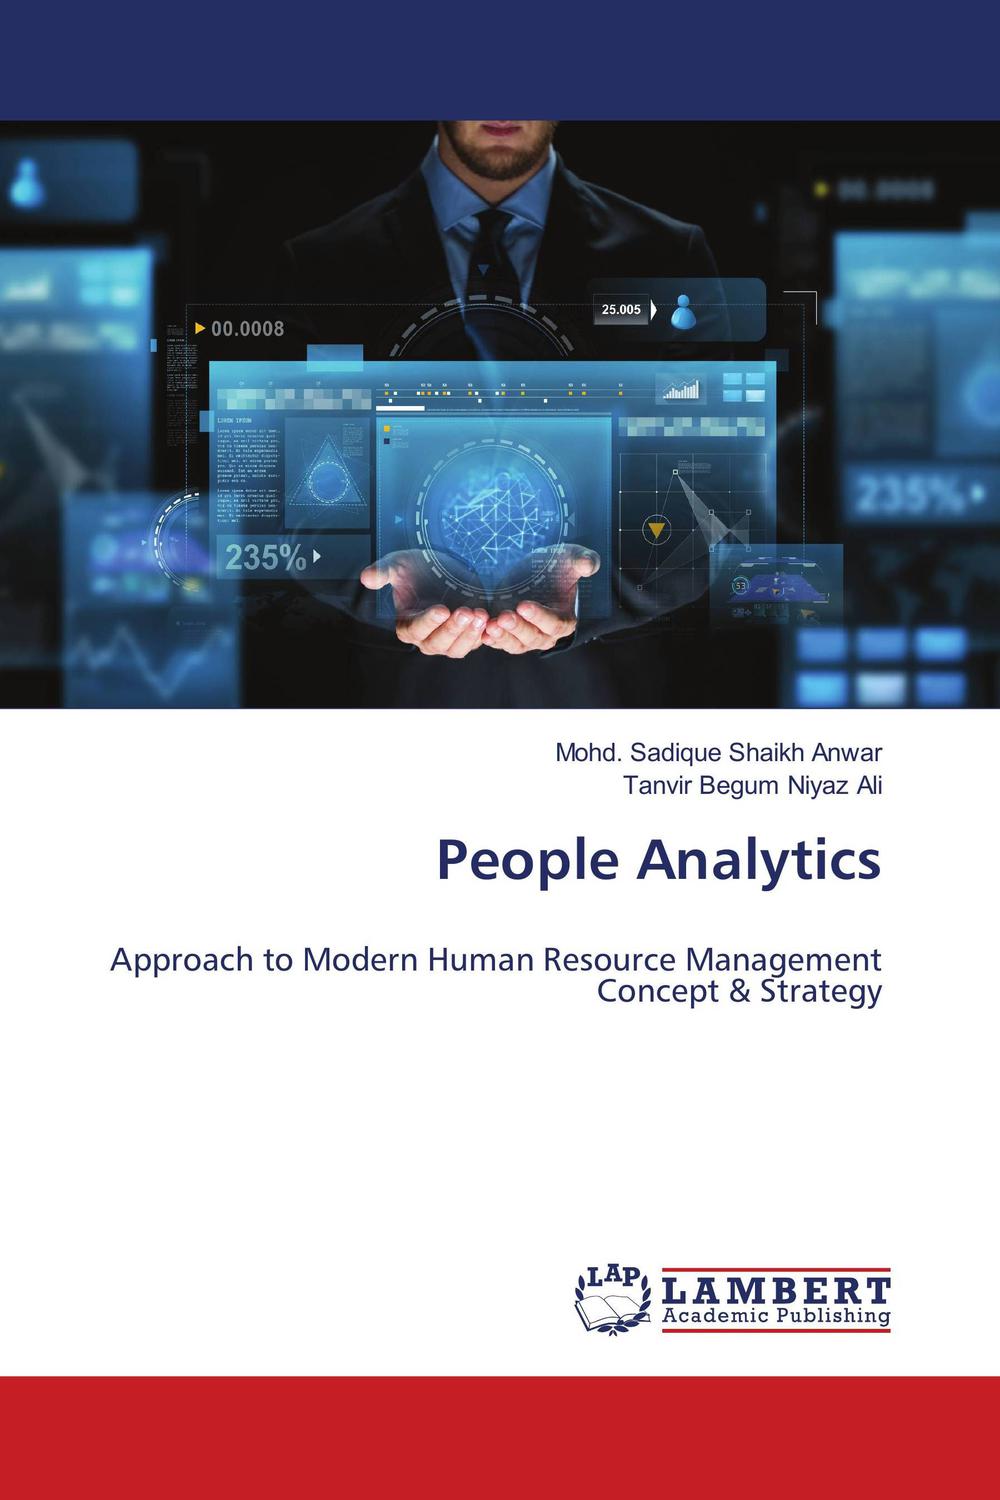 People Analytics Approach To Modern Human Resource Management Concept And Strategy